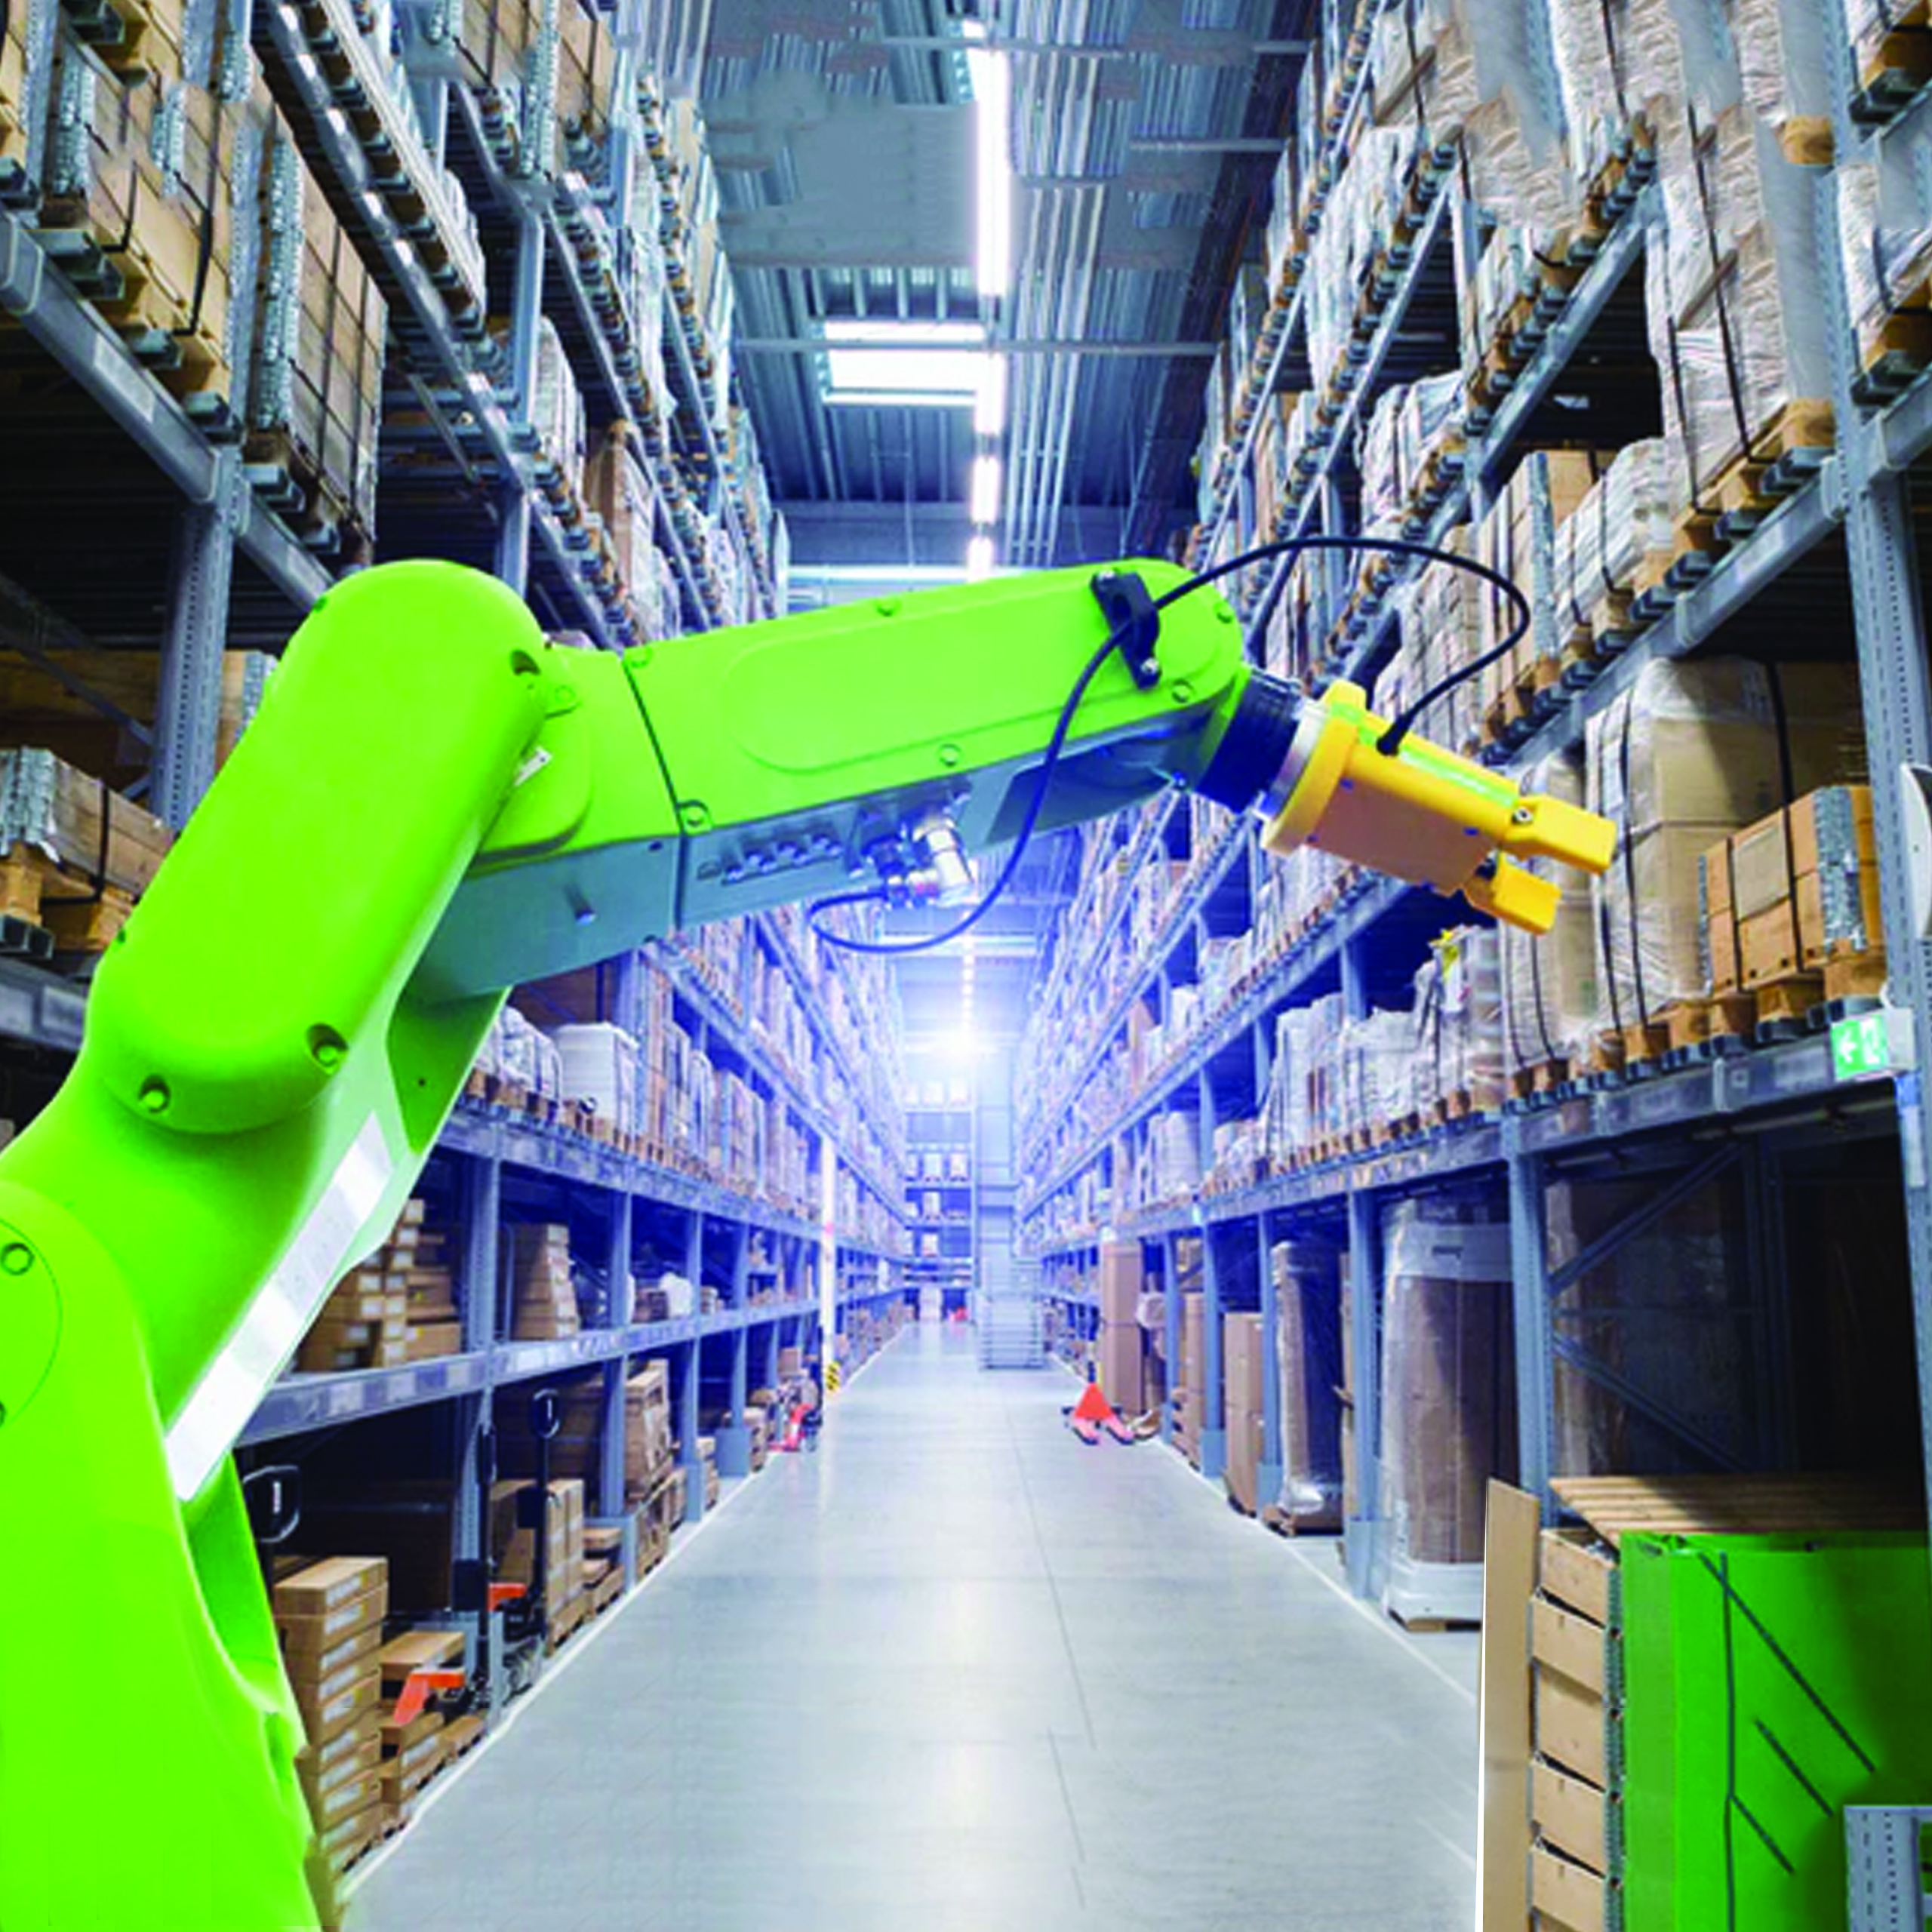 Global Warehouse Automation Robots Market to Hit $37.6 Billion by 2030